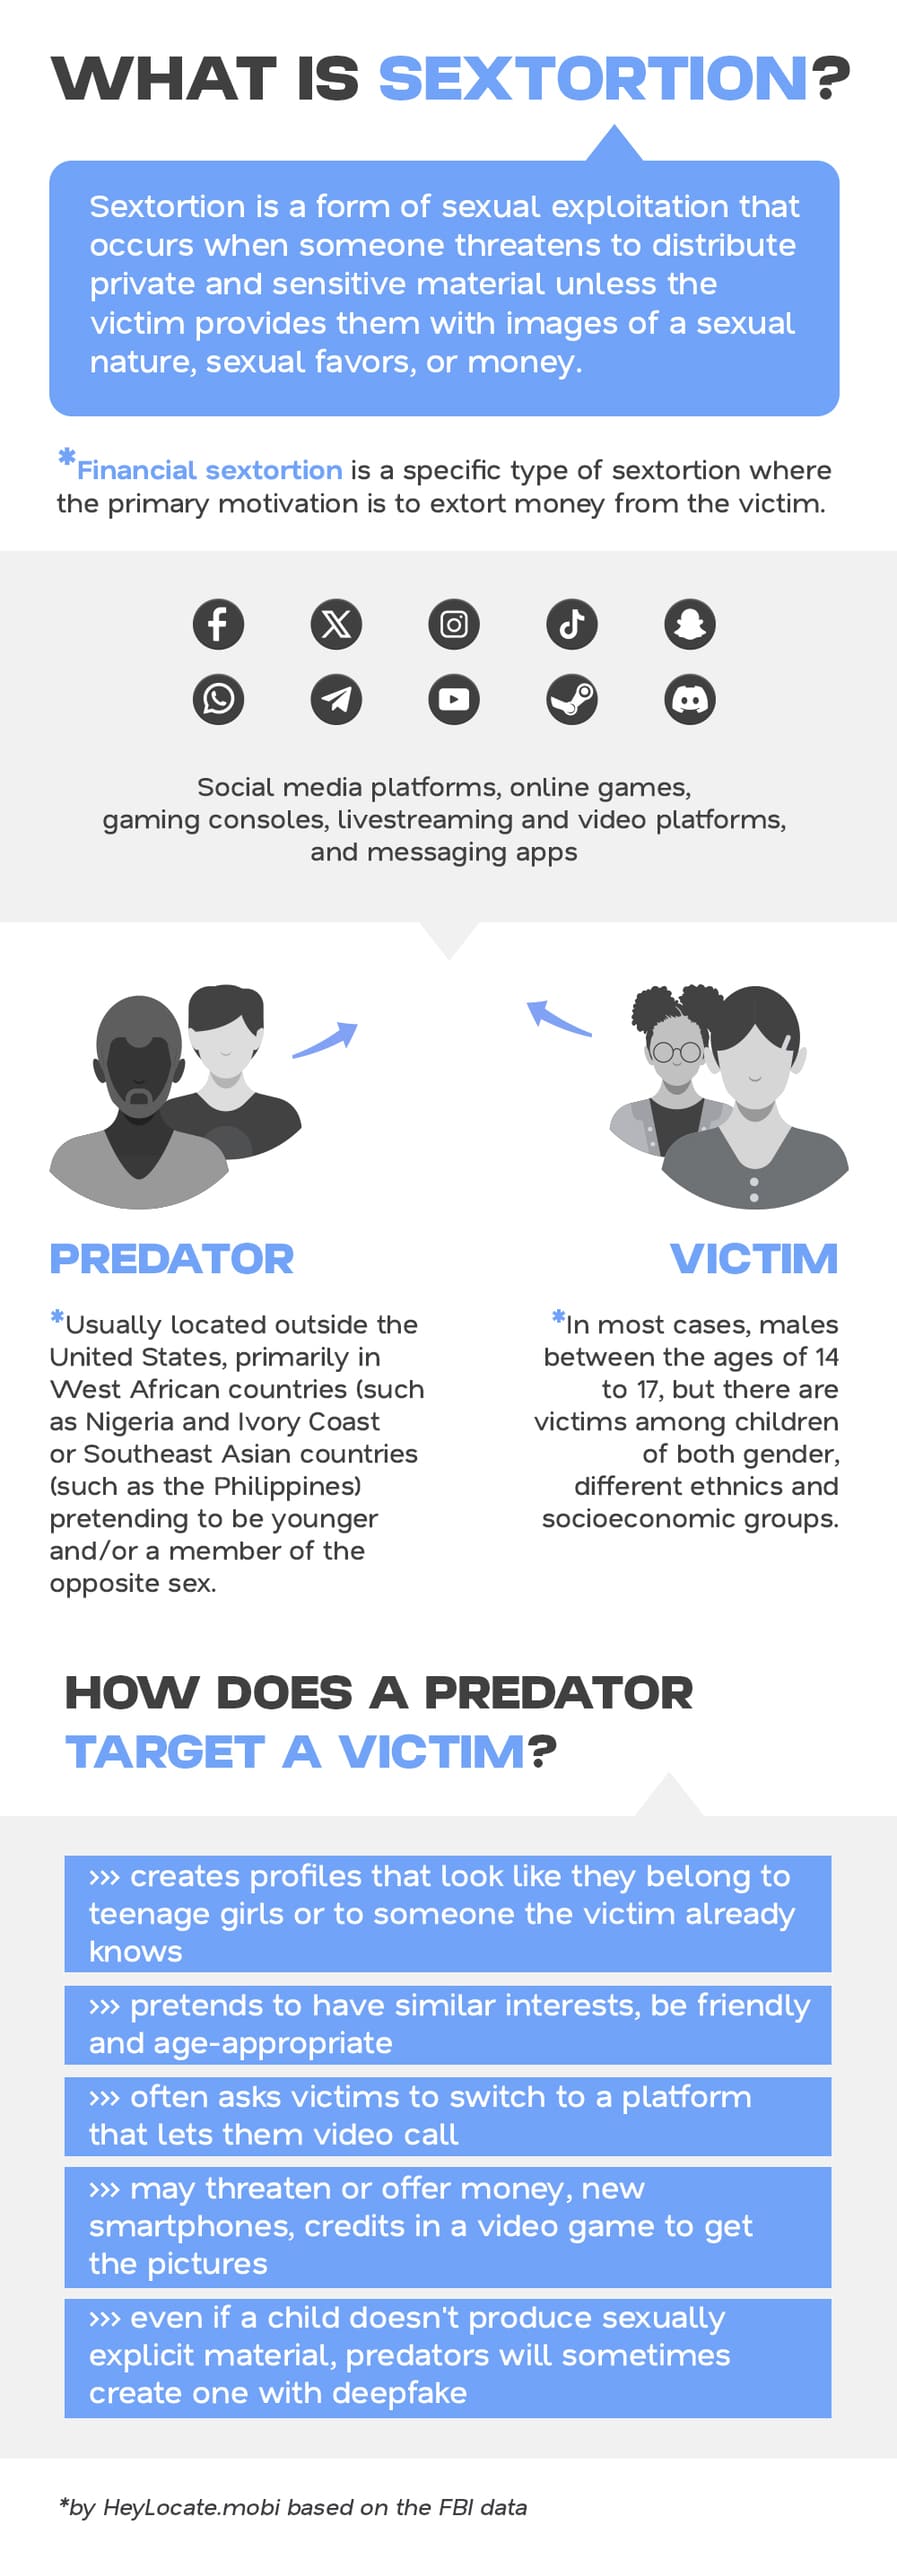 Infographic explaining what is sextortion, including financial sextortion, who is the sextortion criminal, victim’s portrait and offender’s methods